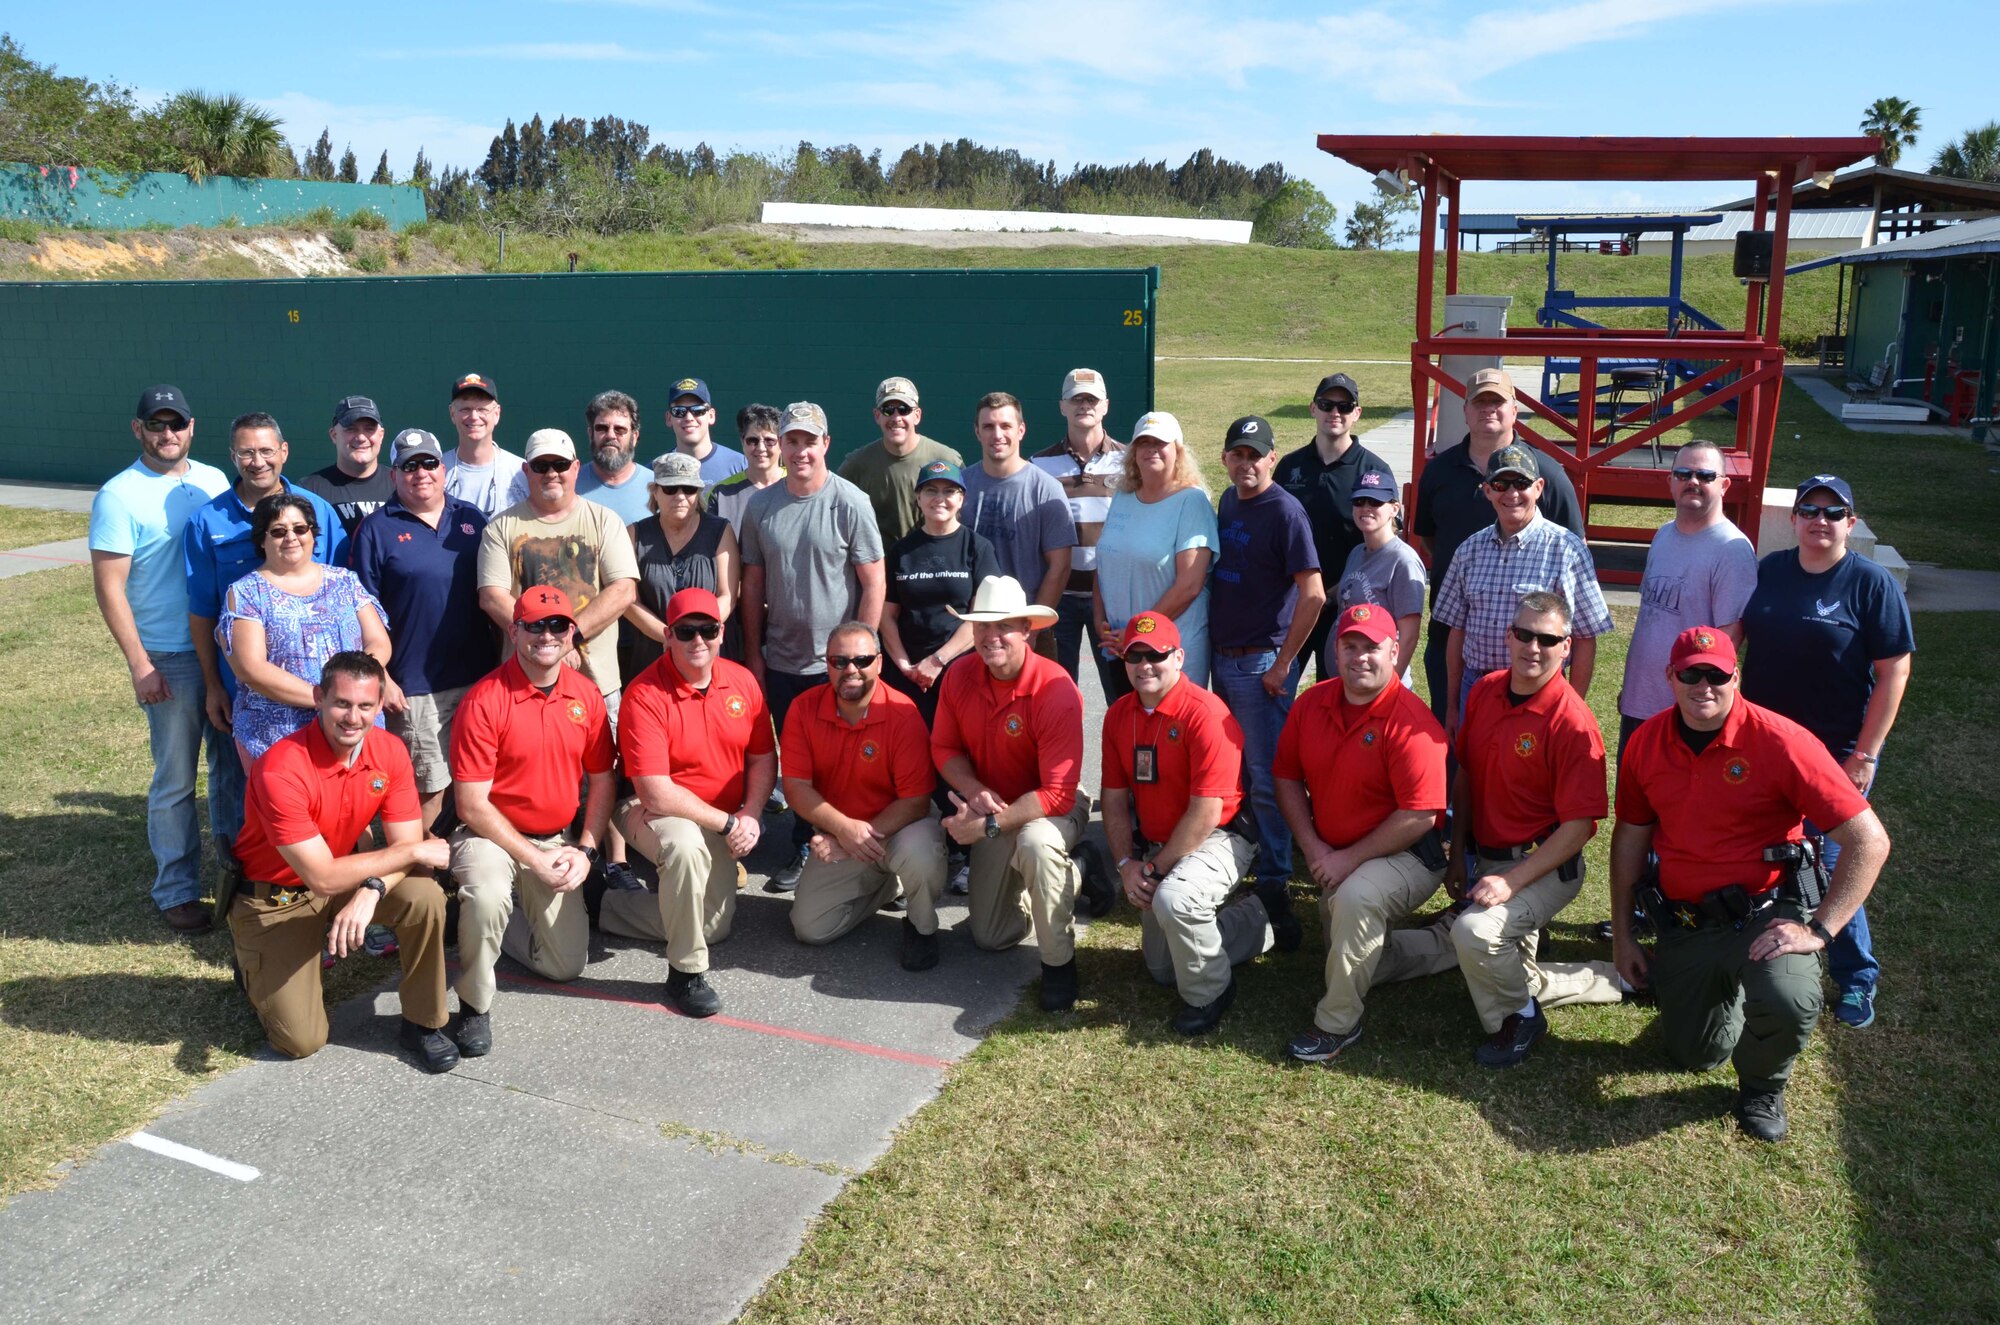 Members of the Air Force Technical Applications Center, Patrick AFB, Fla., and deputies from the Brevard County Sheriff’s Office pose for a group photo after completing BCSO’s Self Defense Through Tactical Shooting and Decision Making course March 25, 2017.  (U.S. Air Force photo by Susan A. Romano)